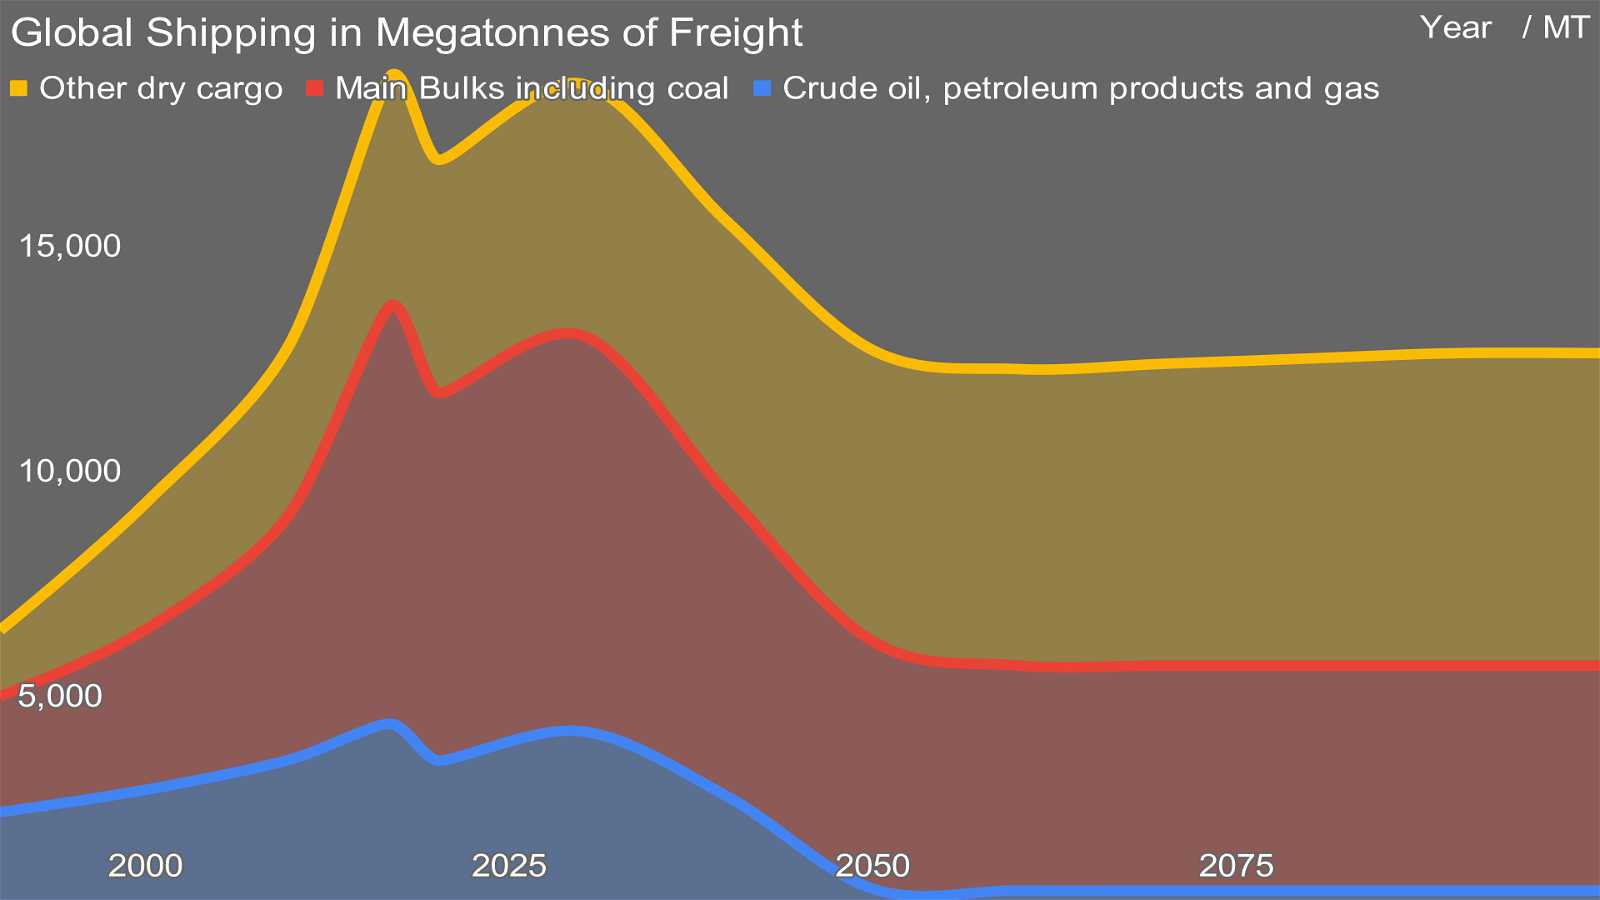 Global Shipping in Megatonnes of Freight by author